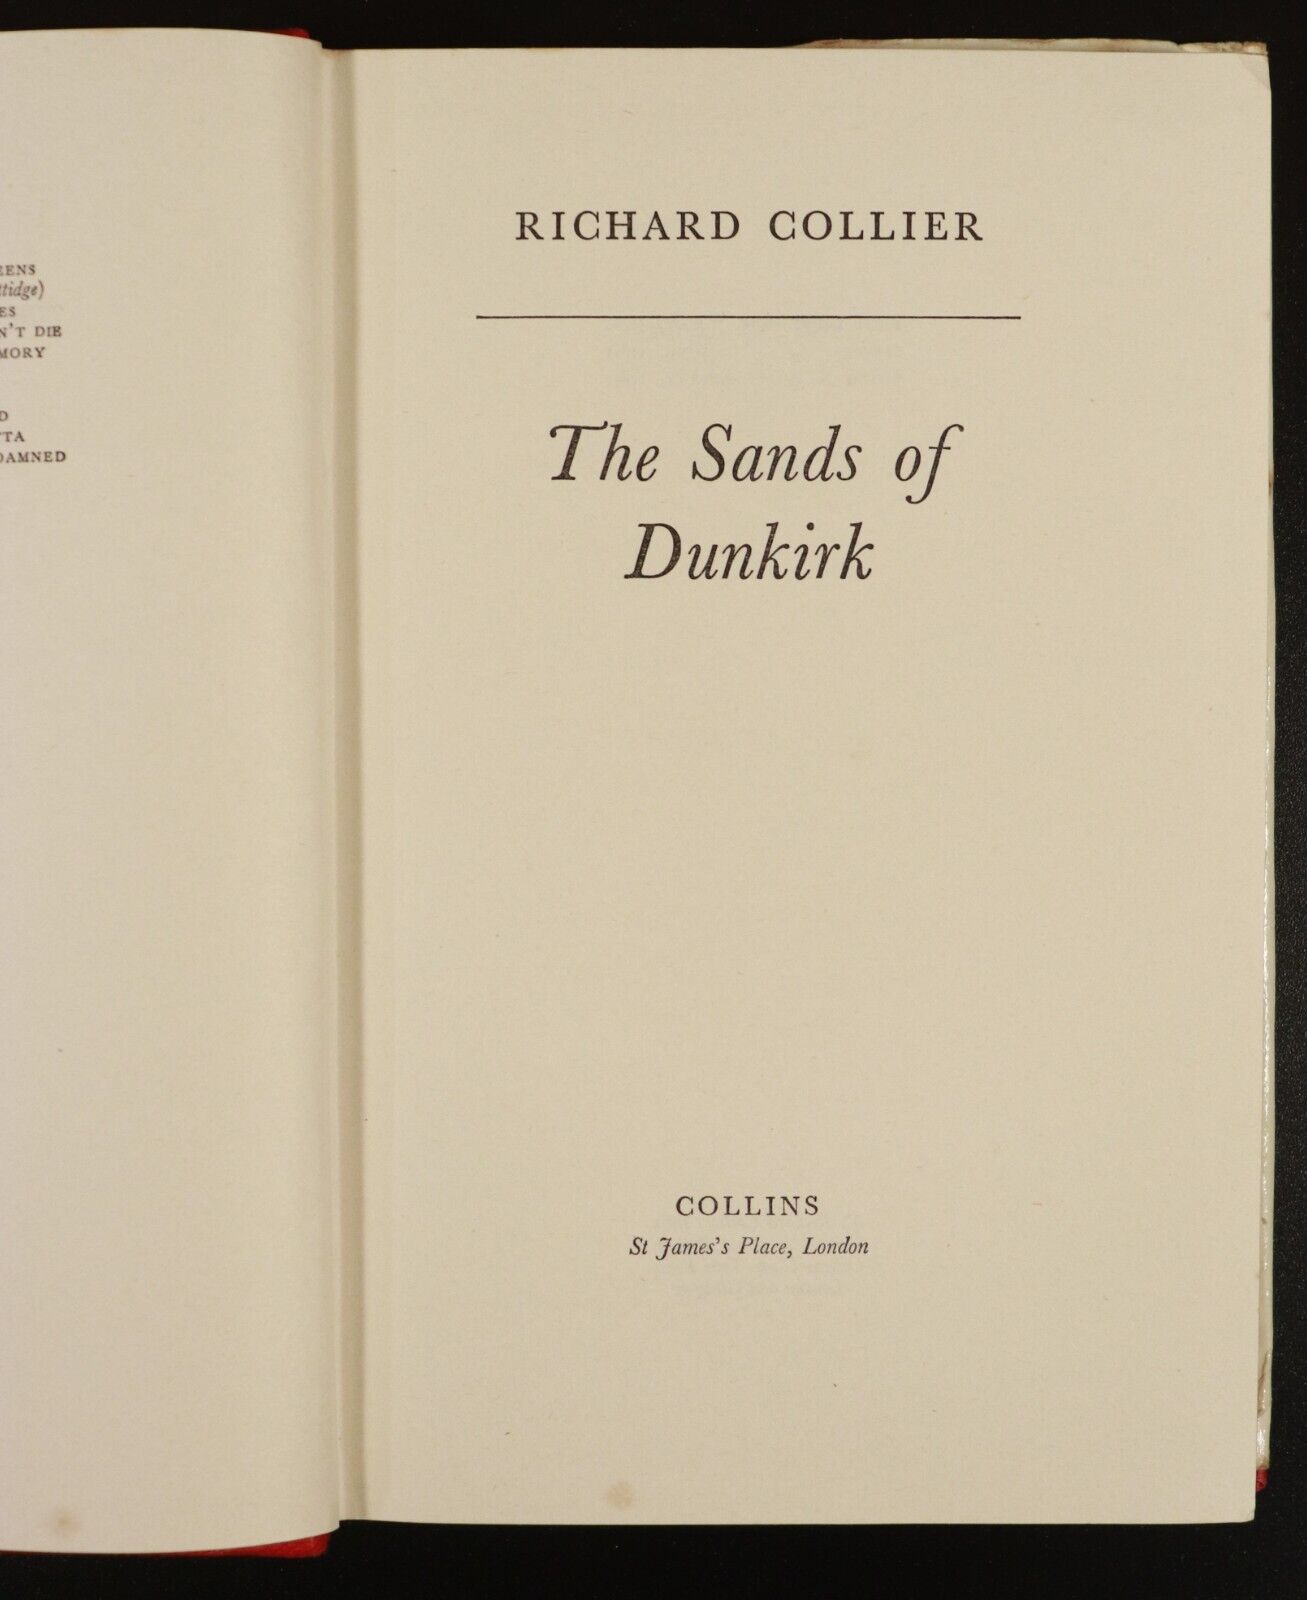 1961 The Sands Of Dunkirk by Richard Collier WW2 Military History Book